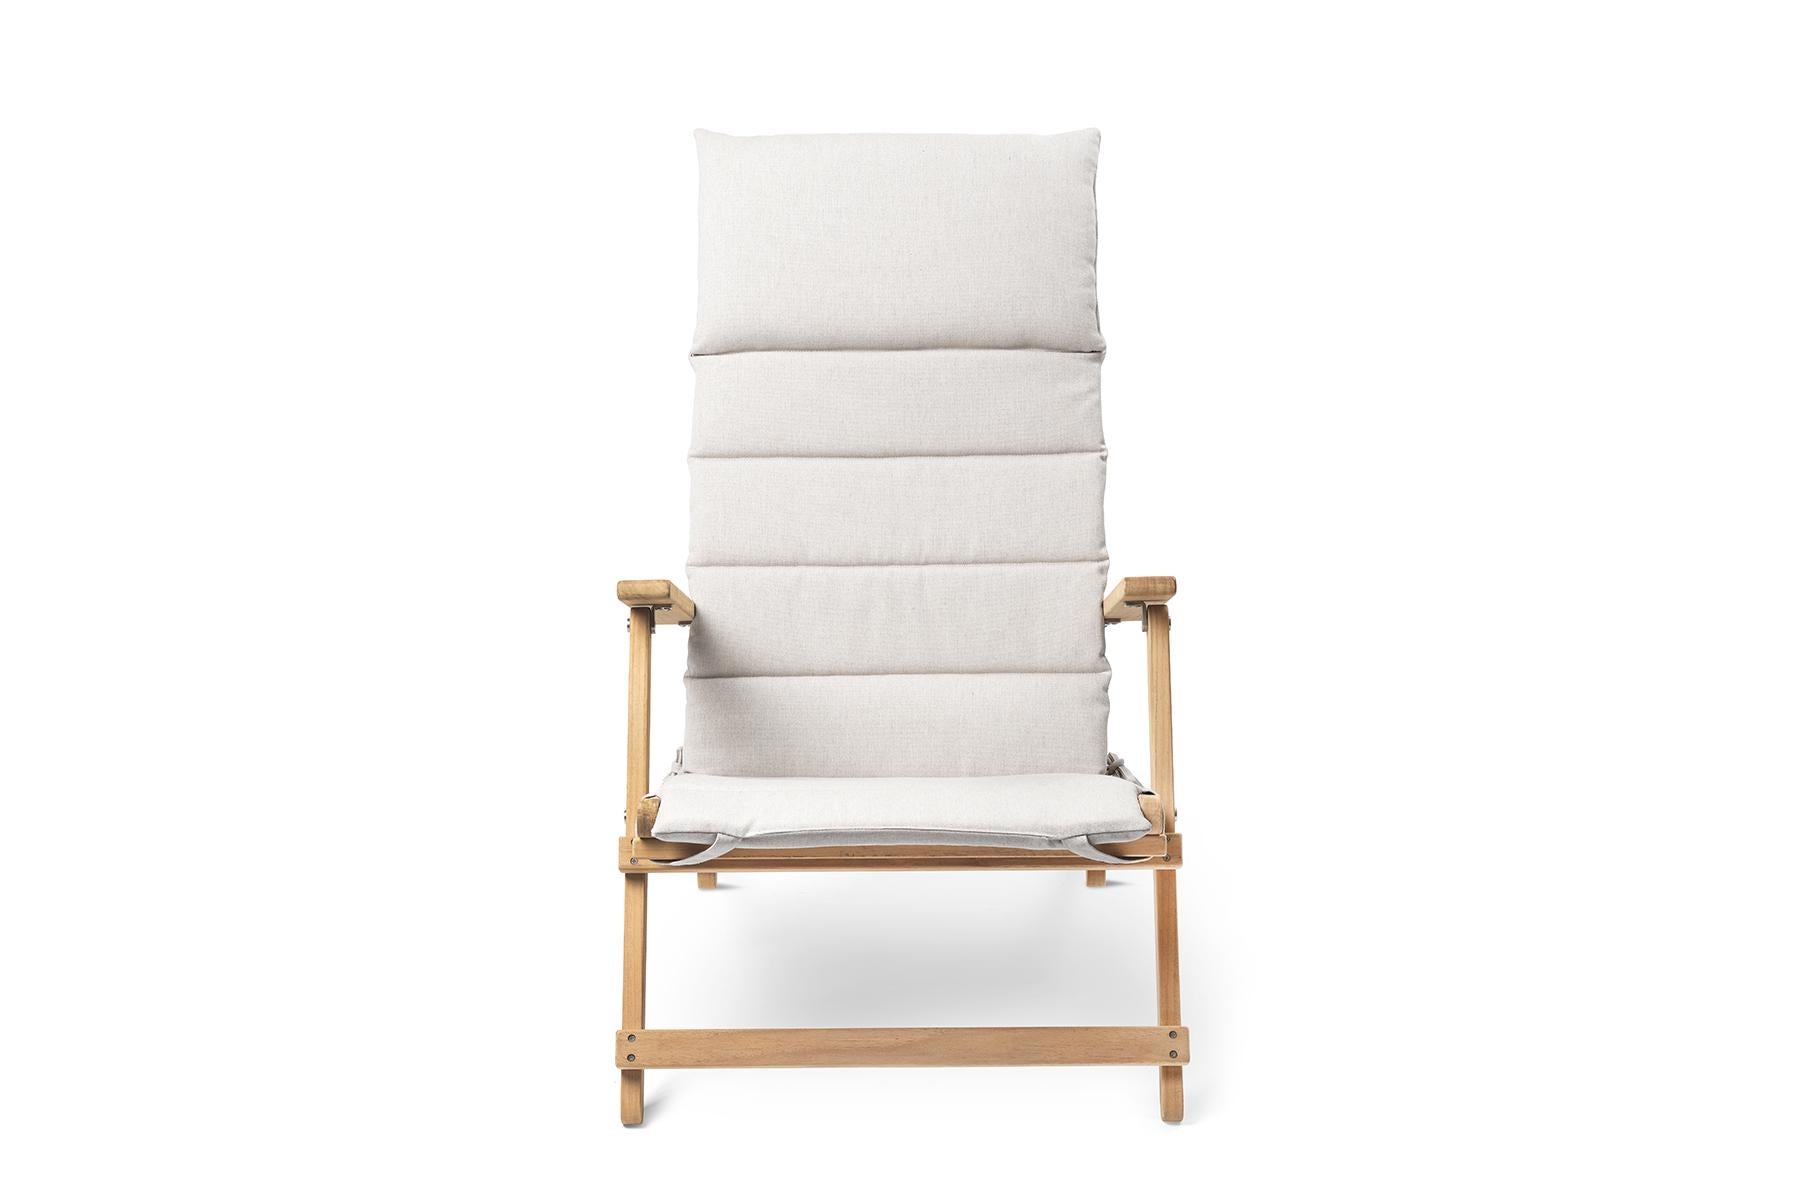 Originally developed in the 1960s for his private balcony, Børge Mogensen ’s deck chair is reintroduced for 2020 and beyond. With its folding function and angled frame, the BM5568 Deck Chair profiles an inviting, honest and laid-back expression in